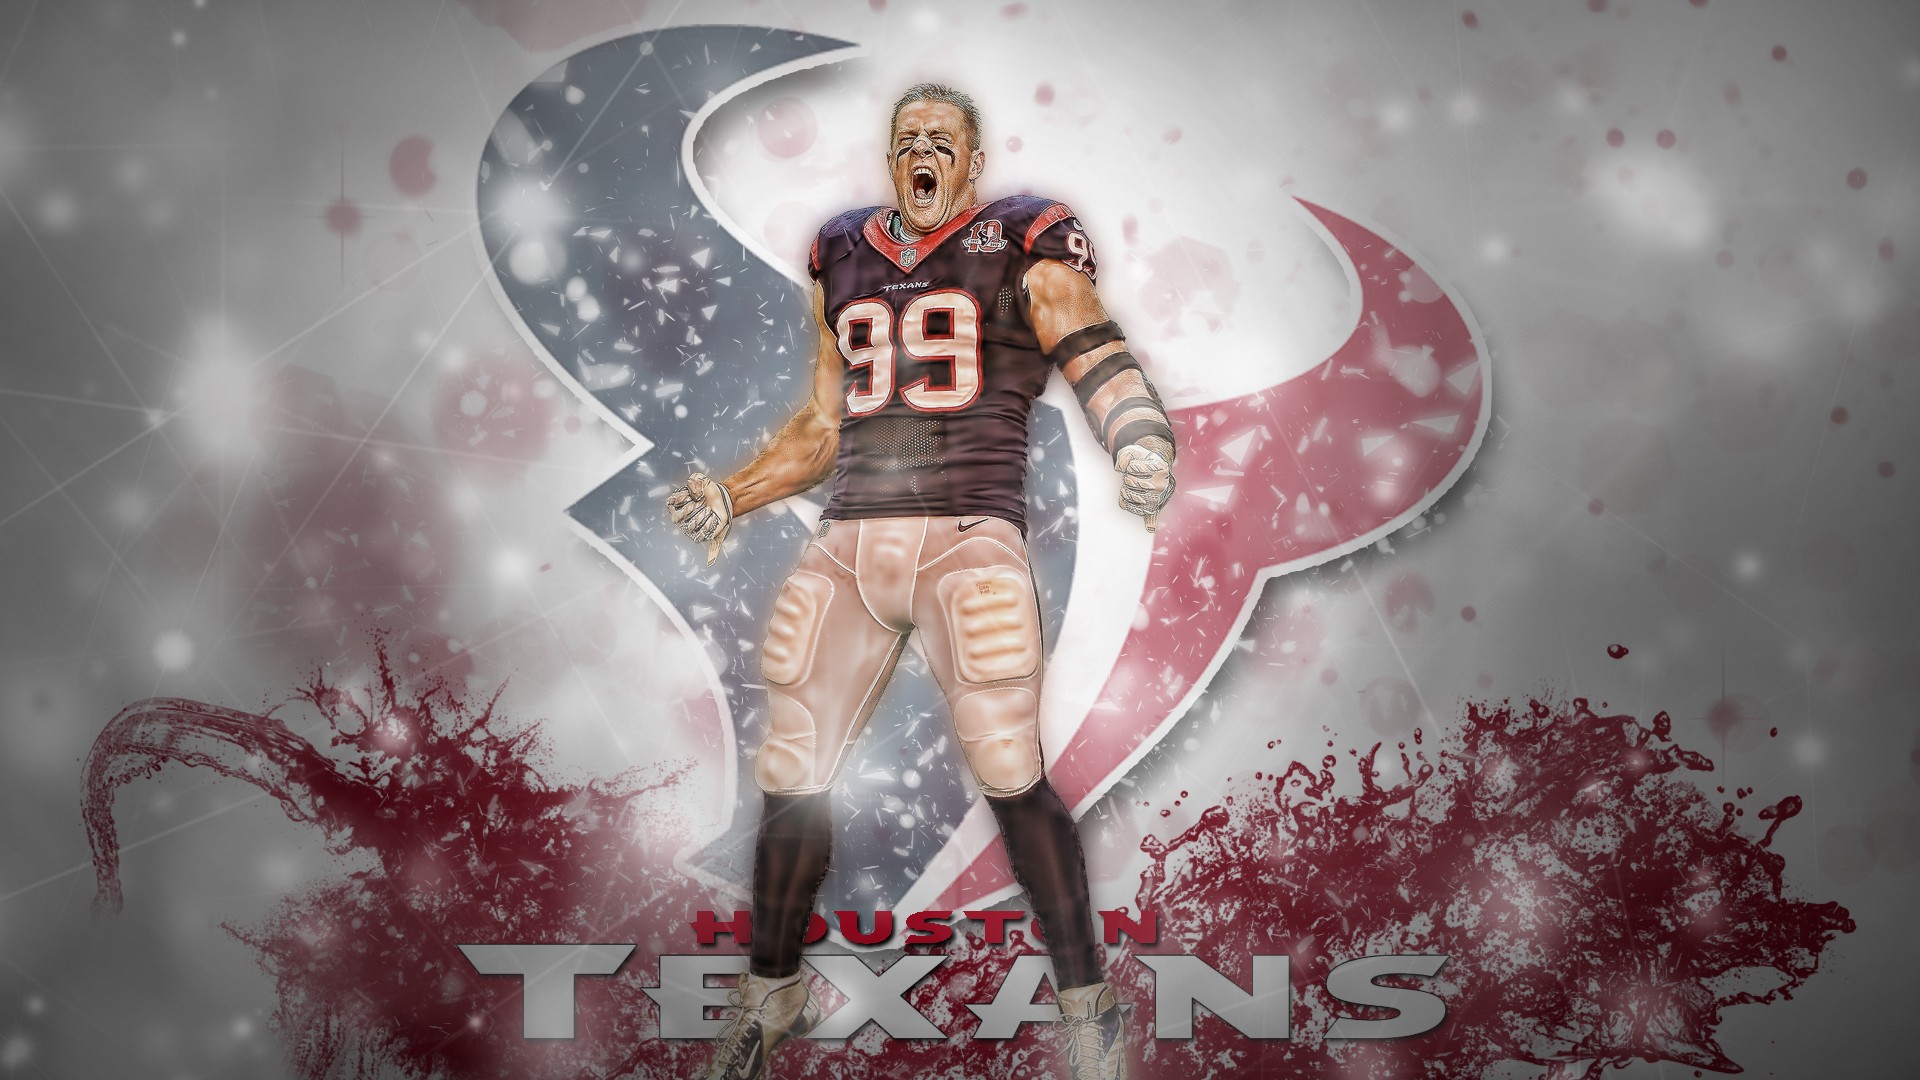 Desktop Wallpapers Houston Texans with high-resolution 1920x1080 pixel. Download and set as wallpaper for Desktop Computer, Apple iPhone X, XS Max, XR, 8, 7, 6, SE, iPad, Android